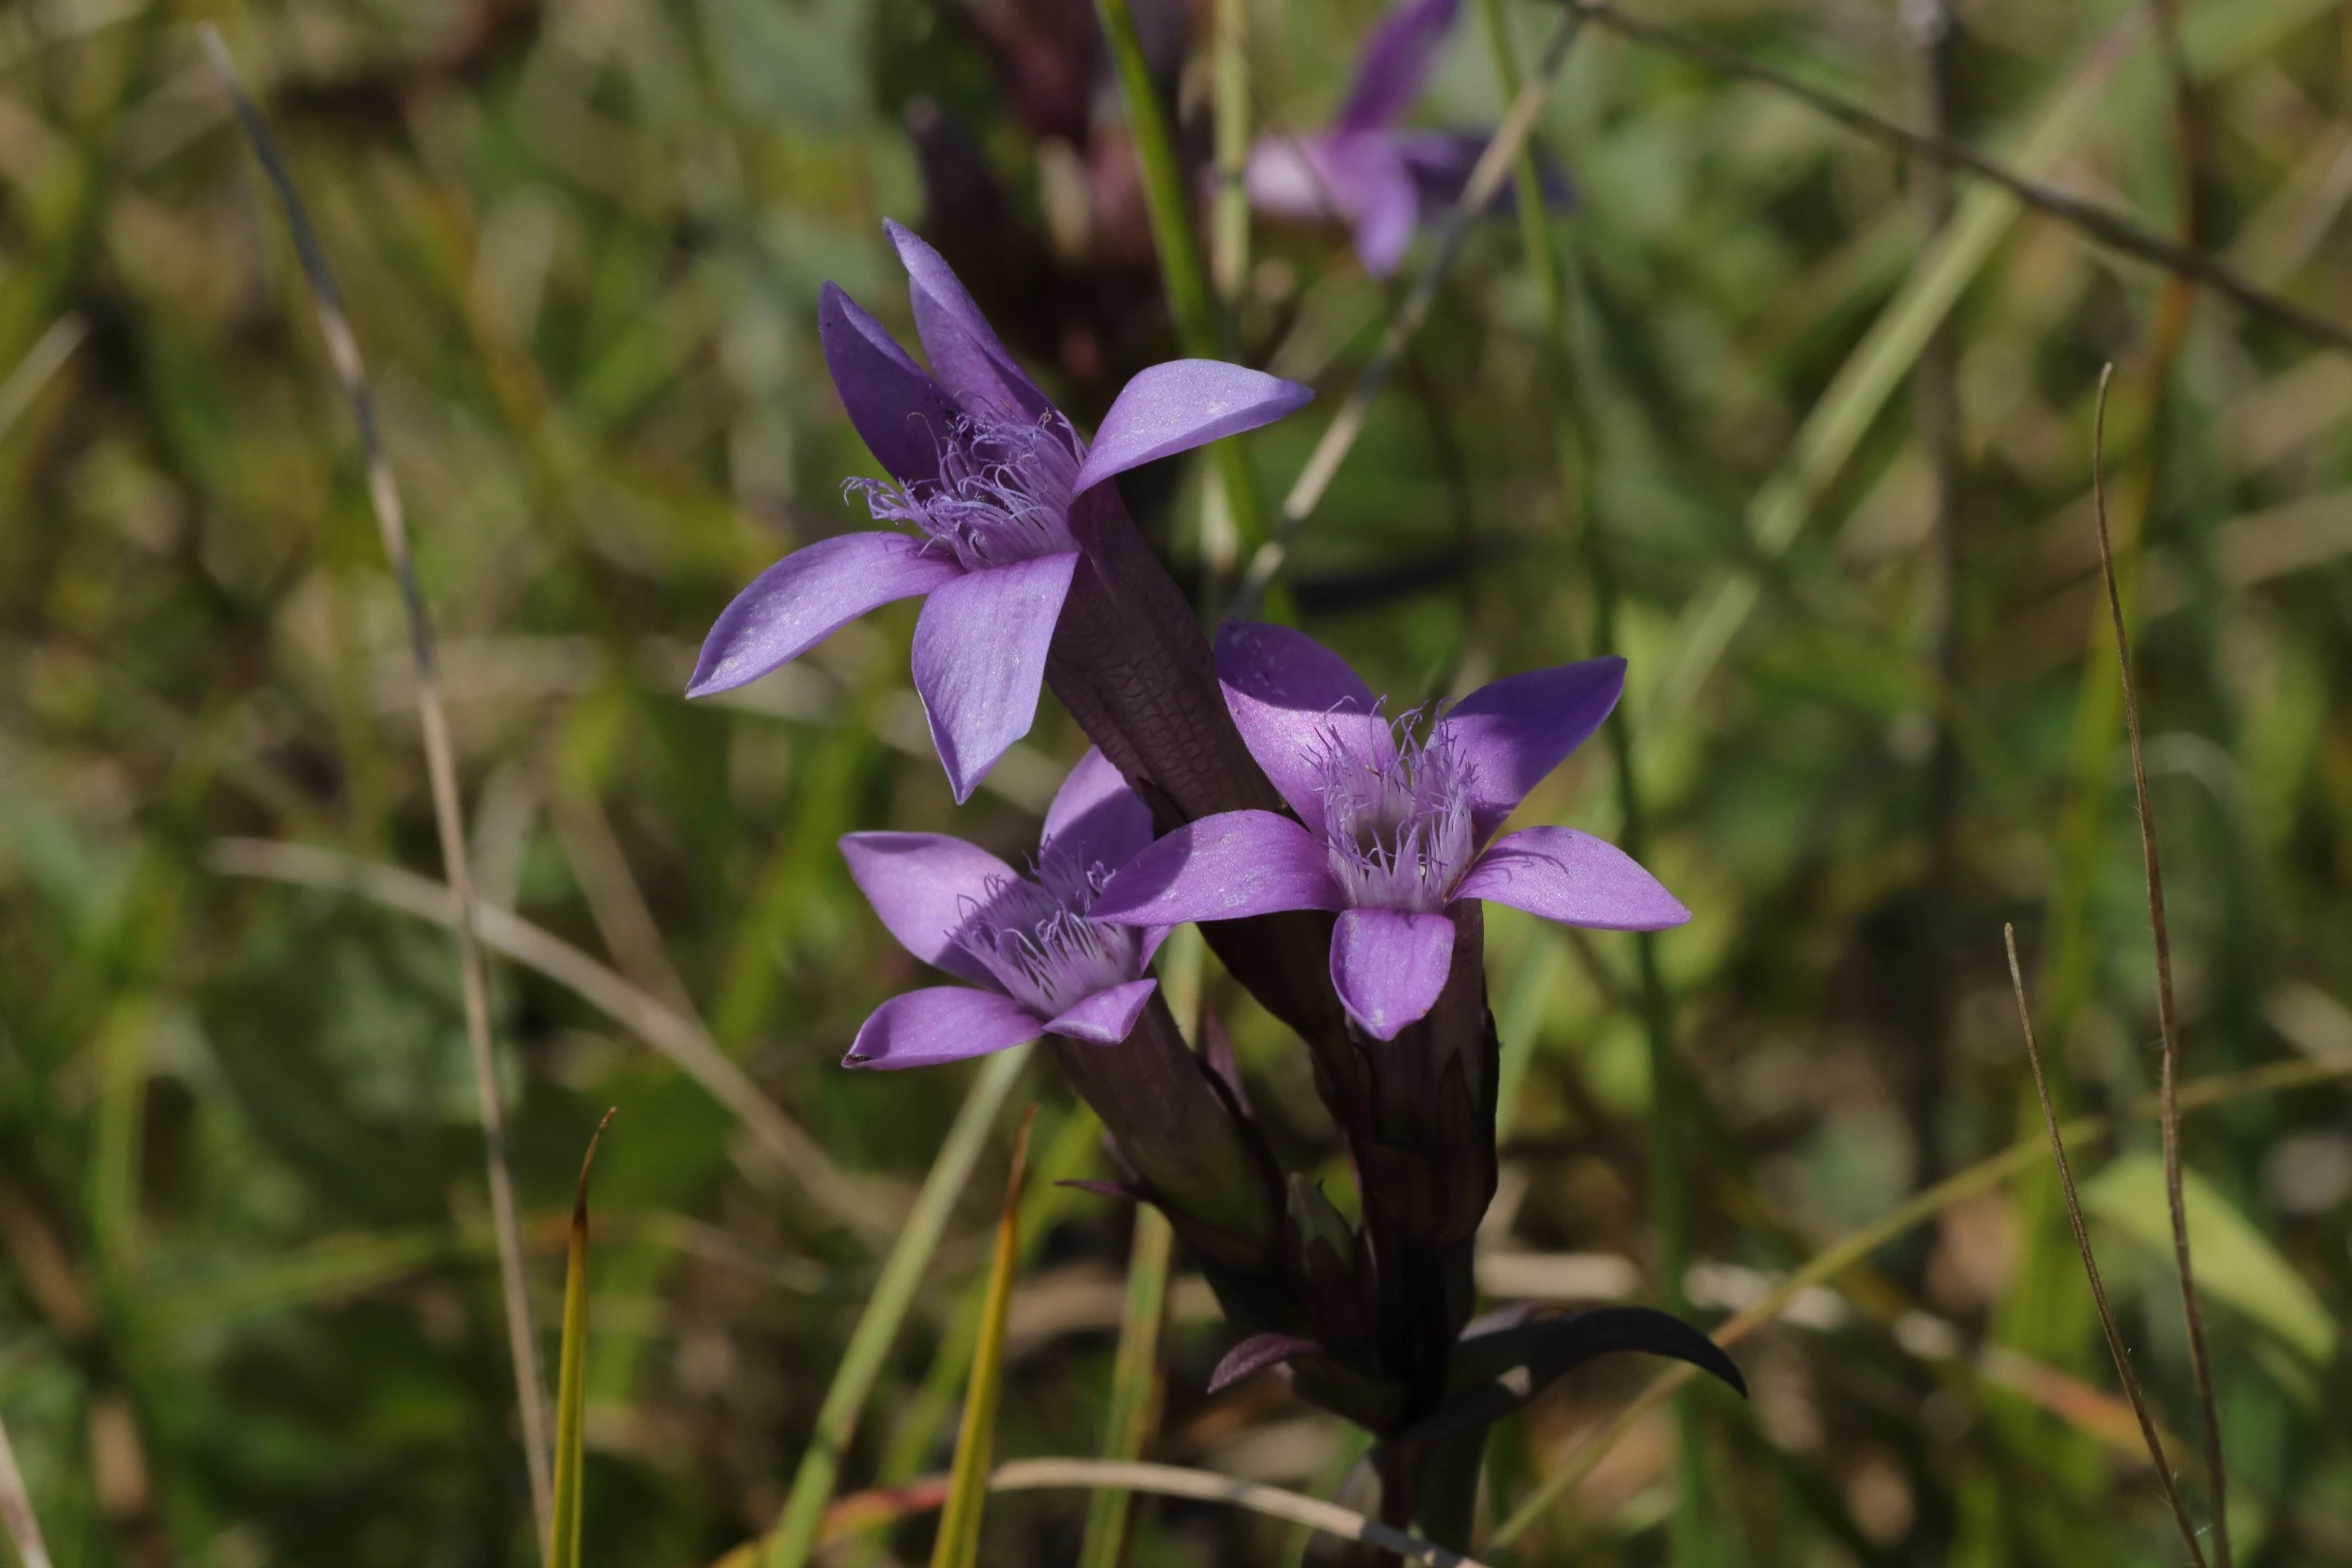 German fringed gentian - inflorescence with several purple coloured flowers